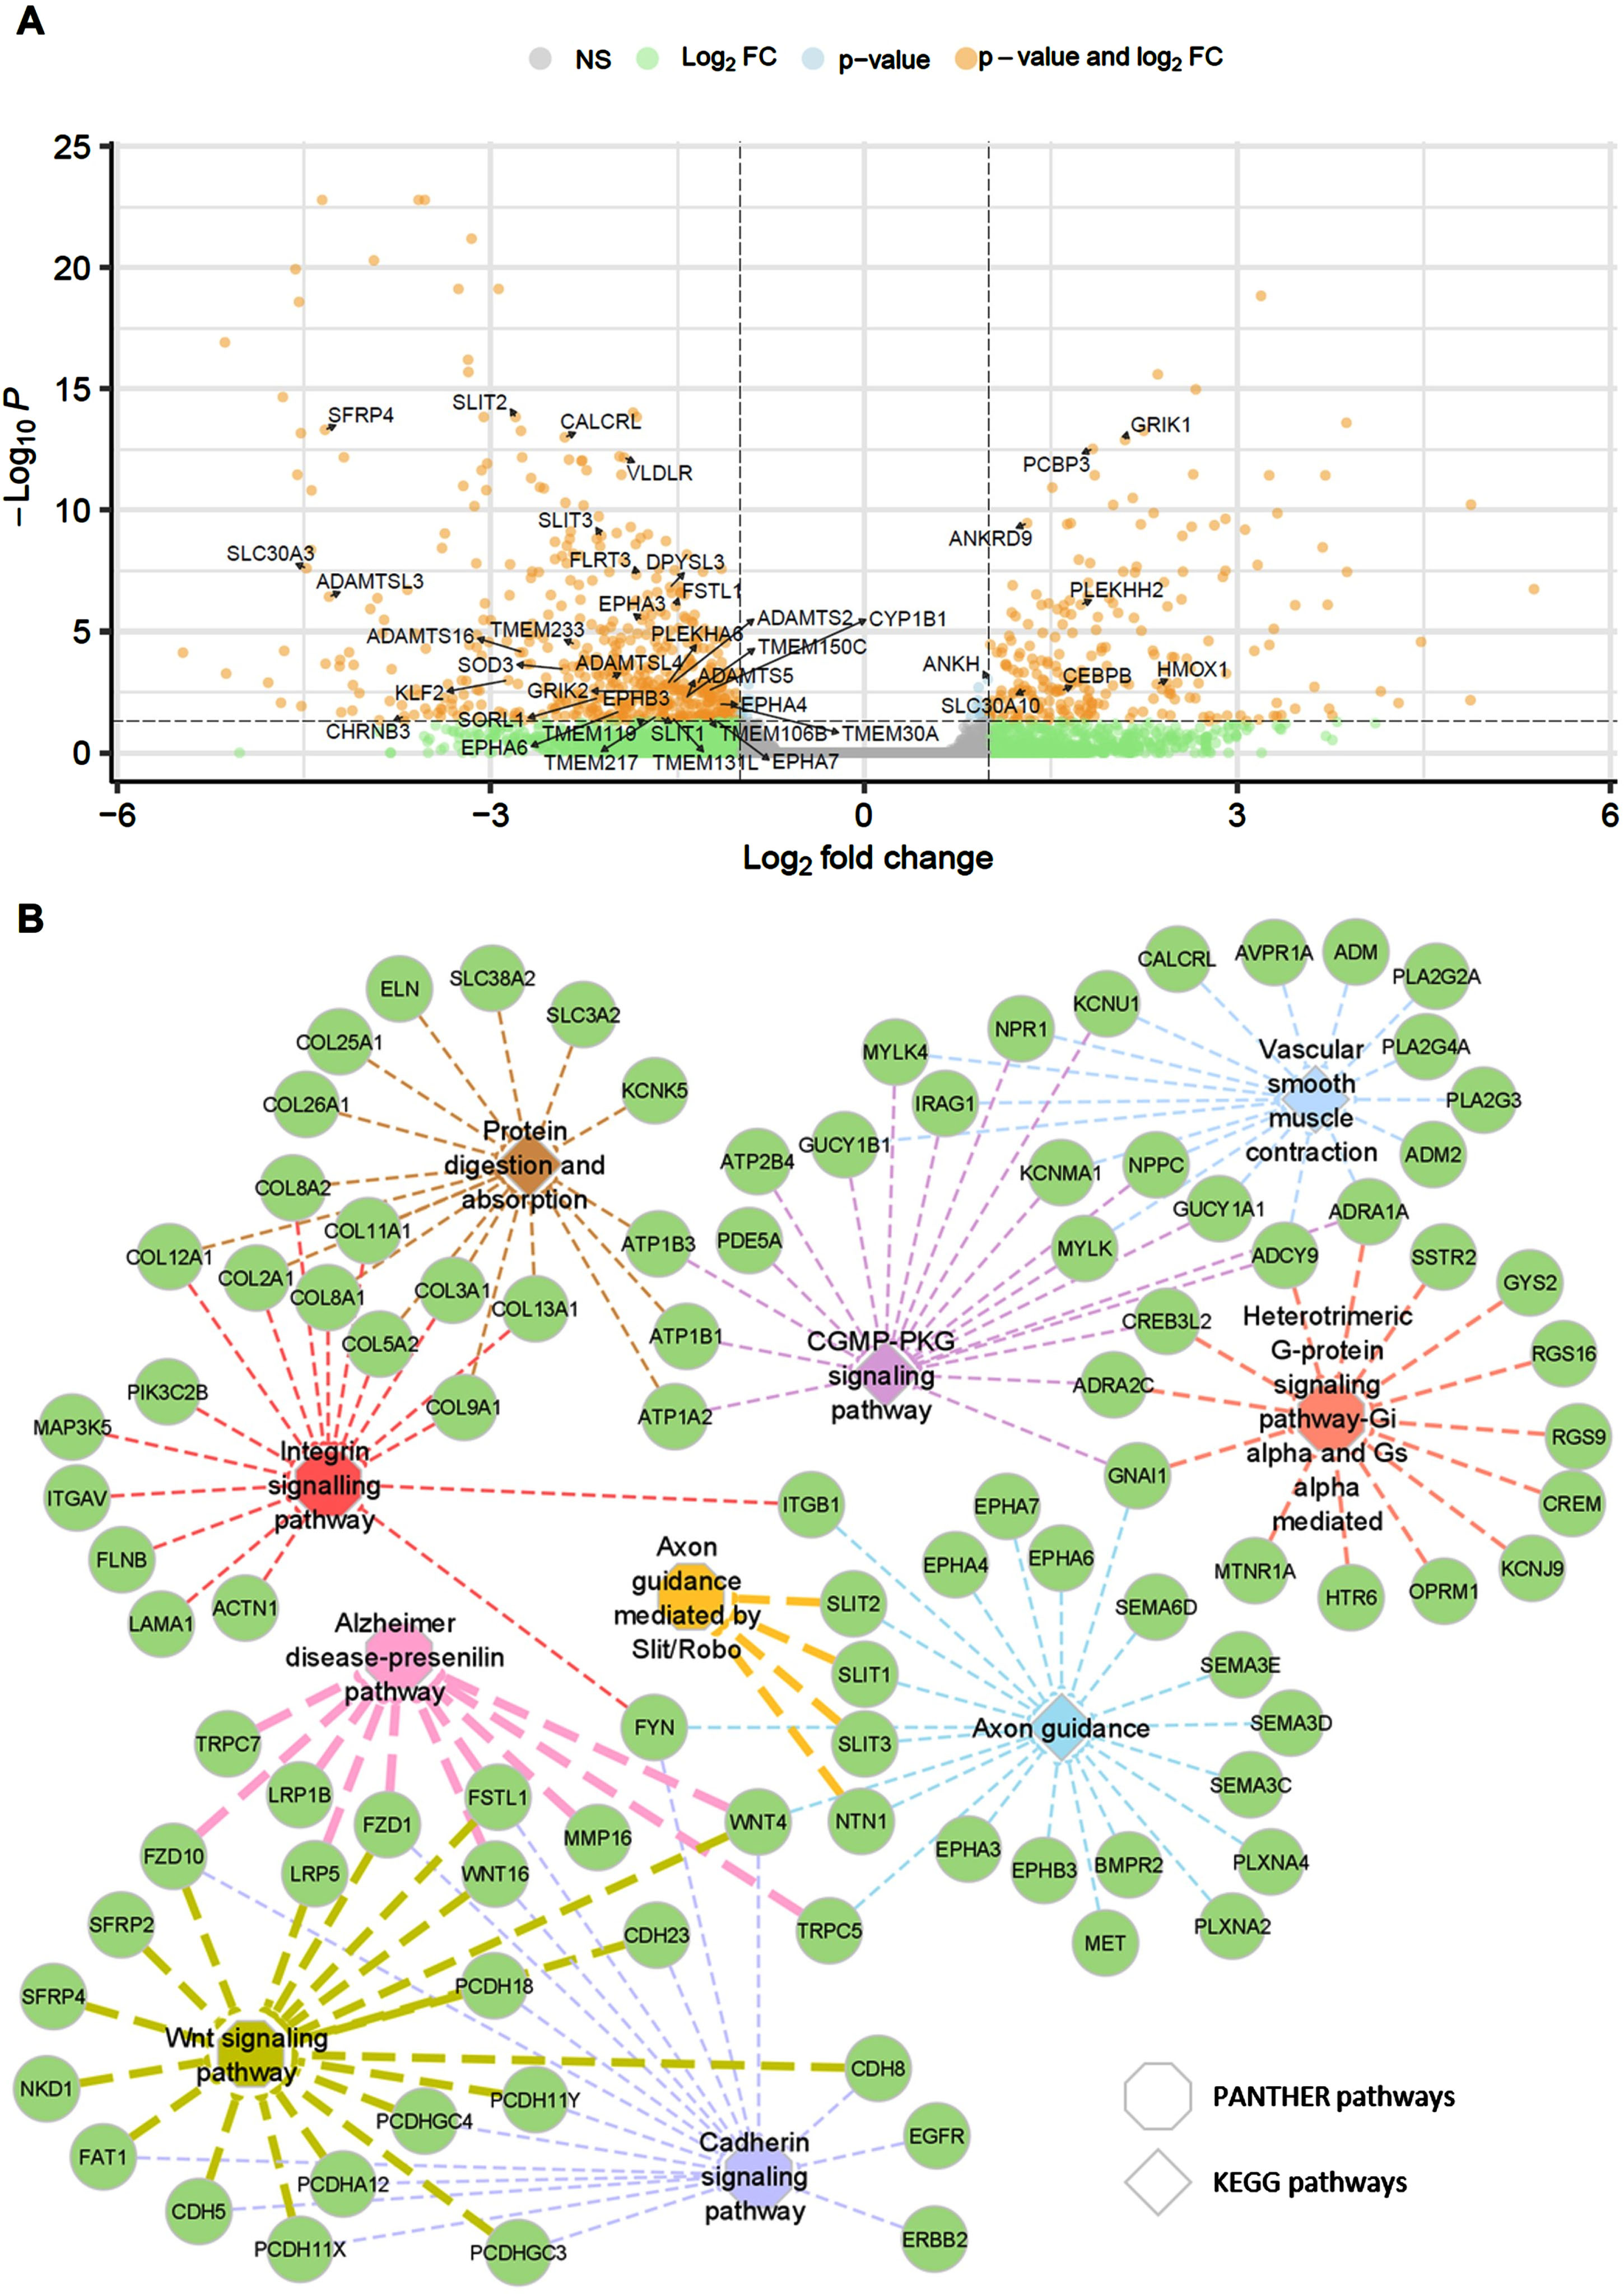 Transcriptome data analysis, regulation, and functional enrichments. Volcano plot depicting differentially expressed genes (DEGs) between DMSO and 100μM sildenafil treated group (A), Genes-pathways relationship network using Cytoscape. Edge width represent the enrichment FDR (false discovery rate) in the network (B). PANTHER pathways are shown using Octagons and KEGG pathways are marked through diamonds. NS, not significant; FC, fold change; cGMP-PKG, cyclic guanosine monophosphate-protein kinase G.